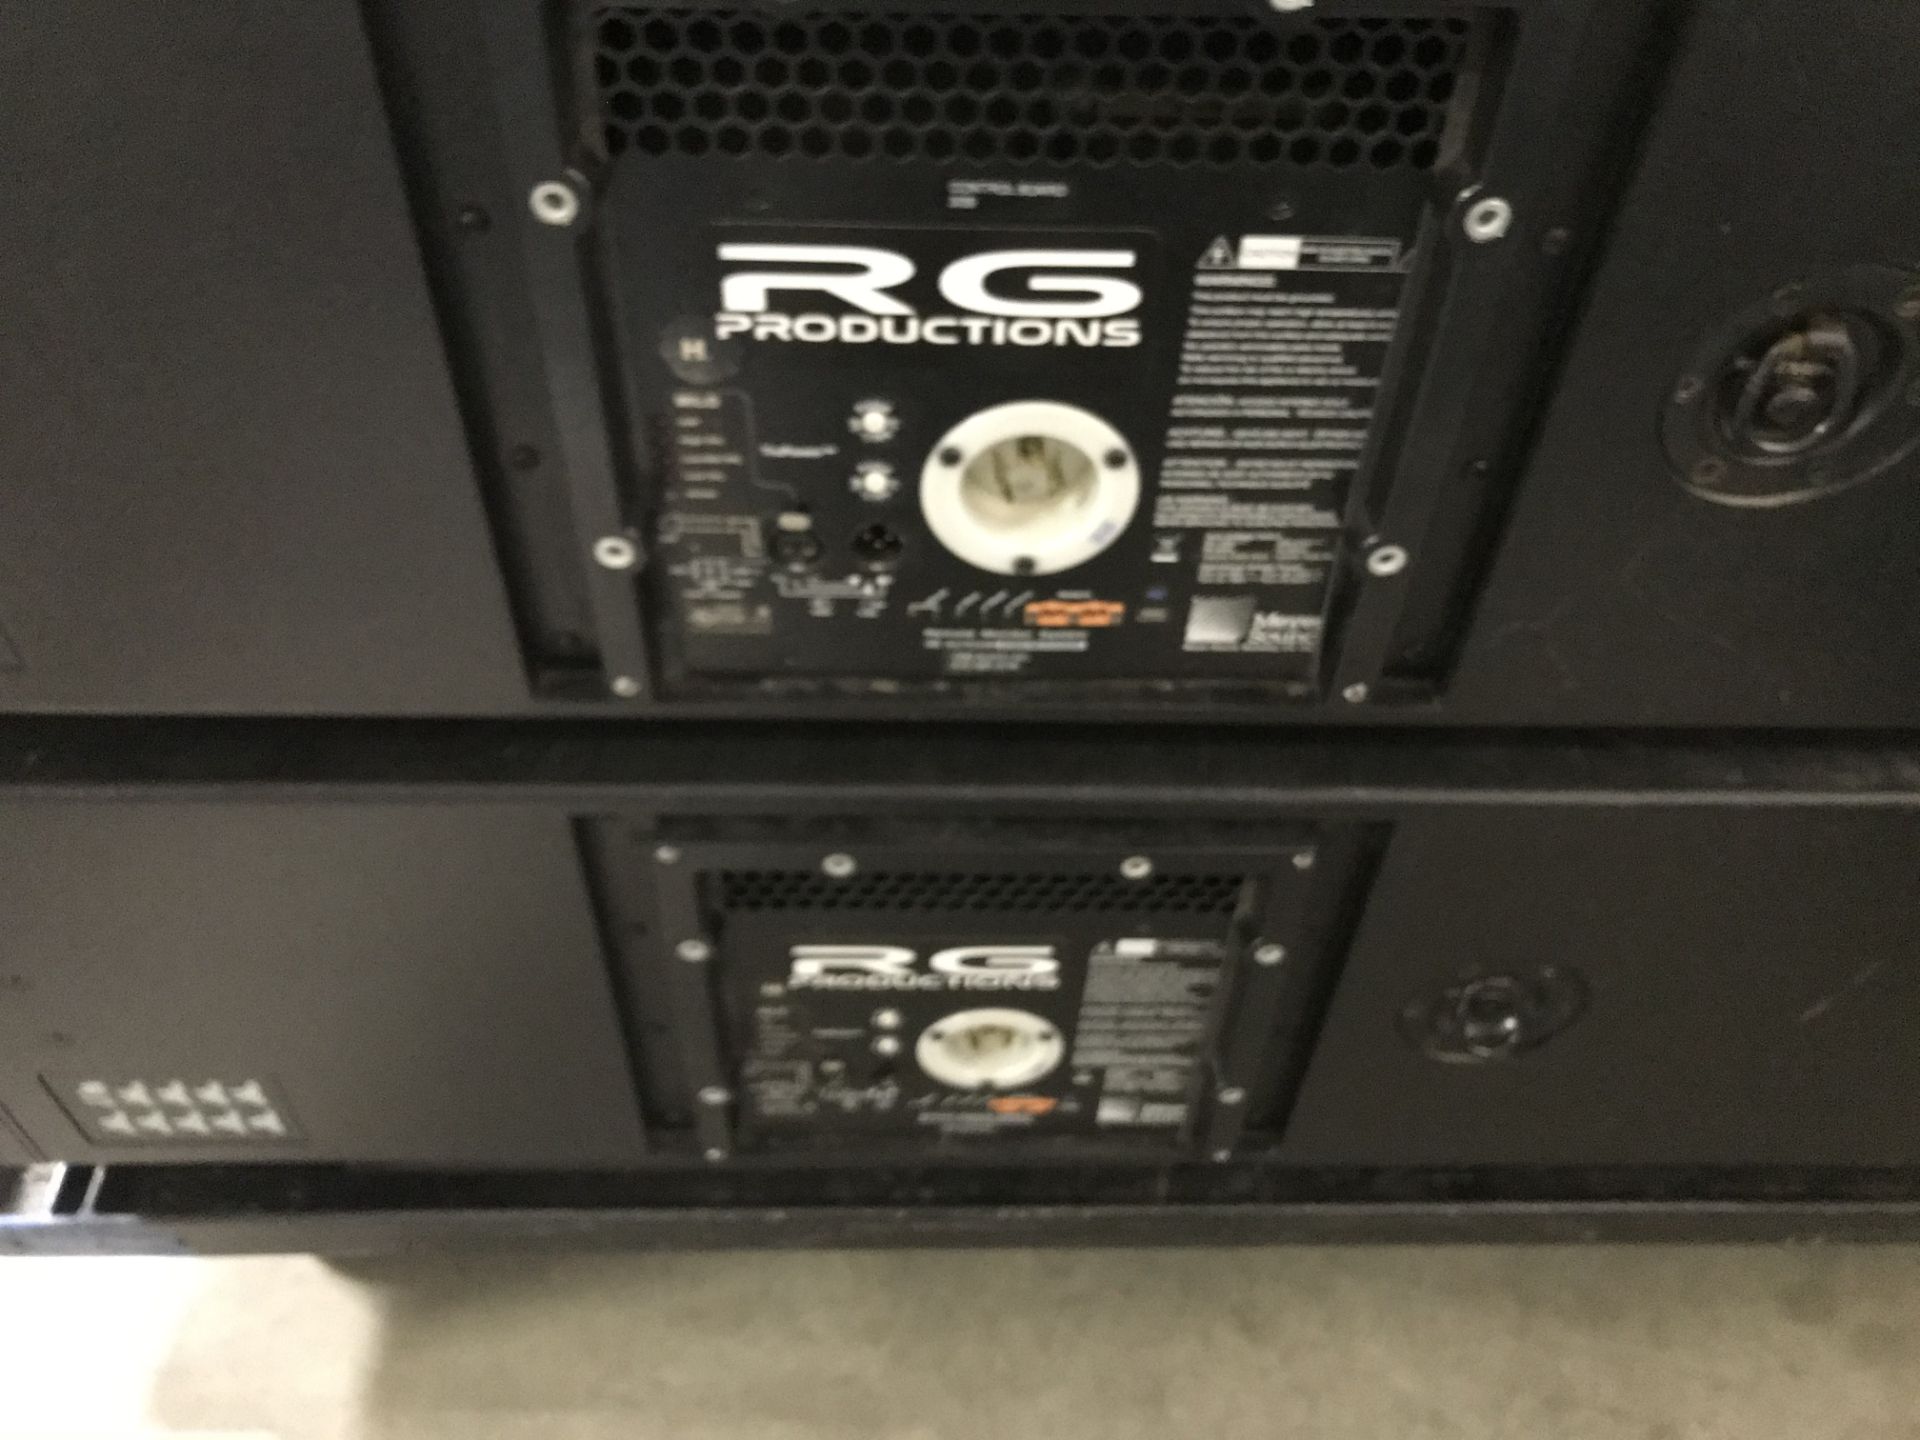 LOT OF: (4) MEYER SOUND, MILO HP MONITORS W/ ROLLING CART AND DUST COVER - Image 5 of 8